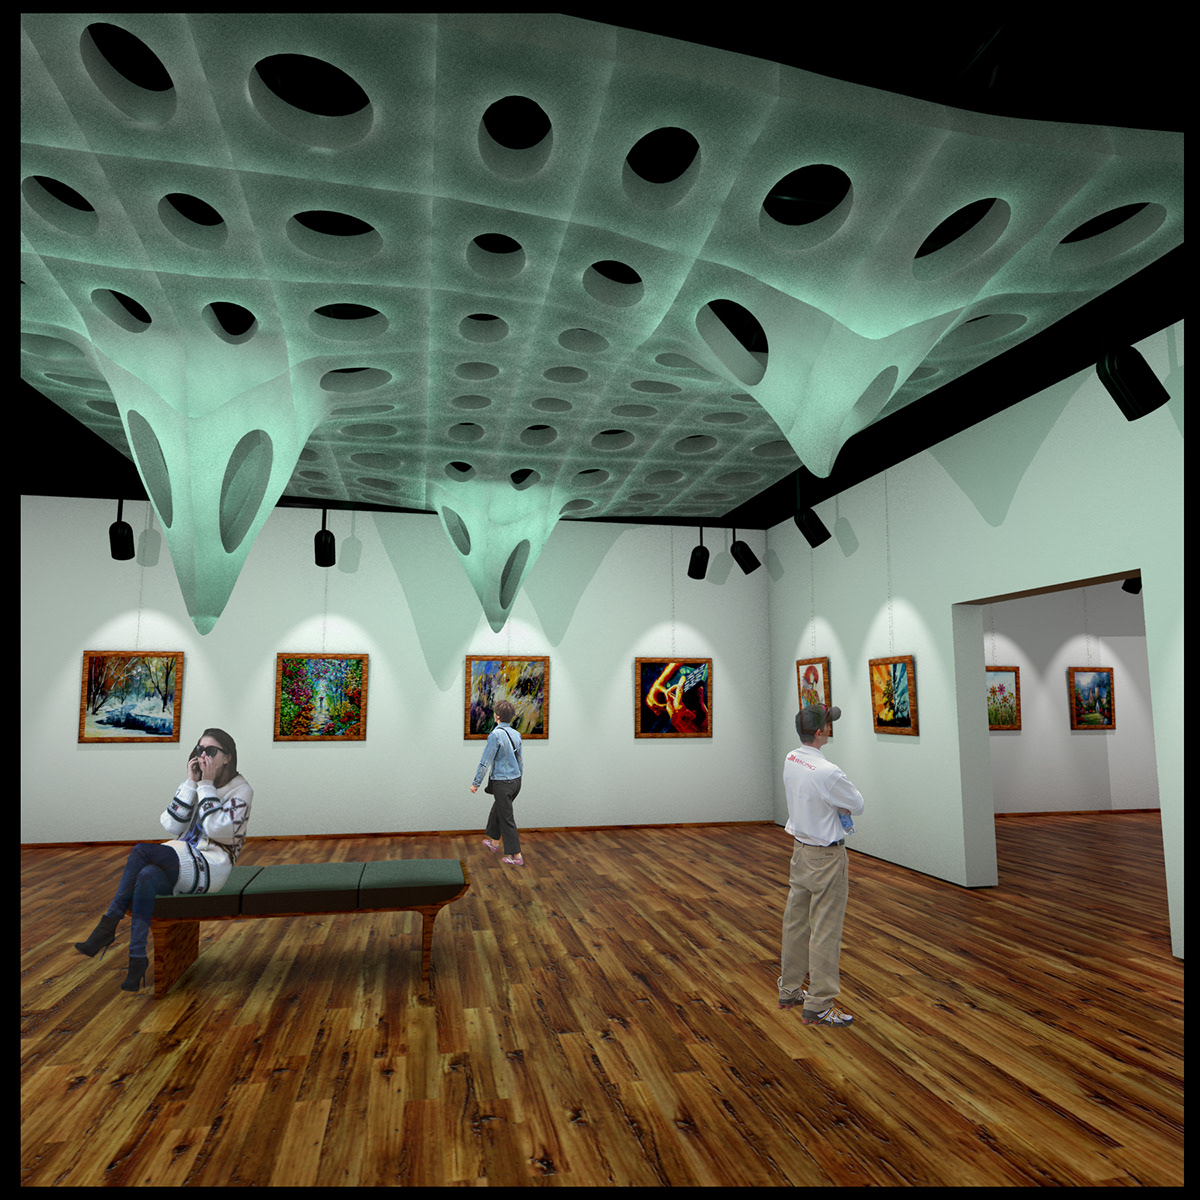 Movable Ceiling Art Gallery  exhibition space interactive architecture Dynamic Architecture